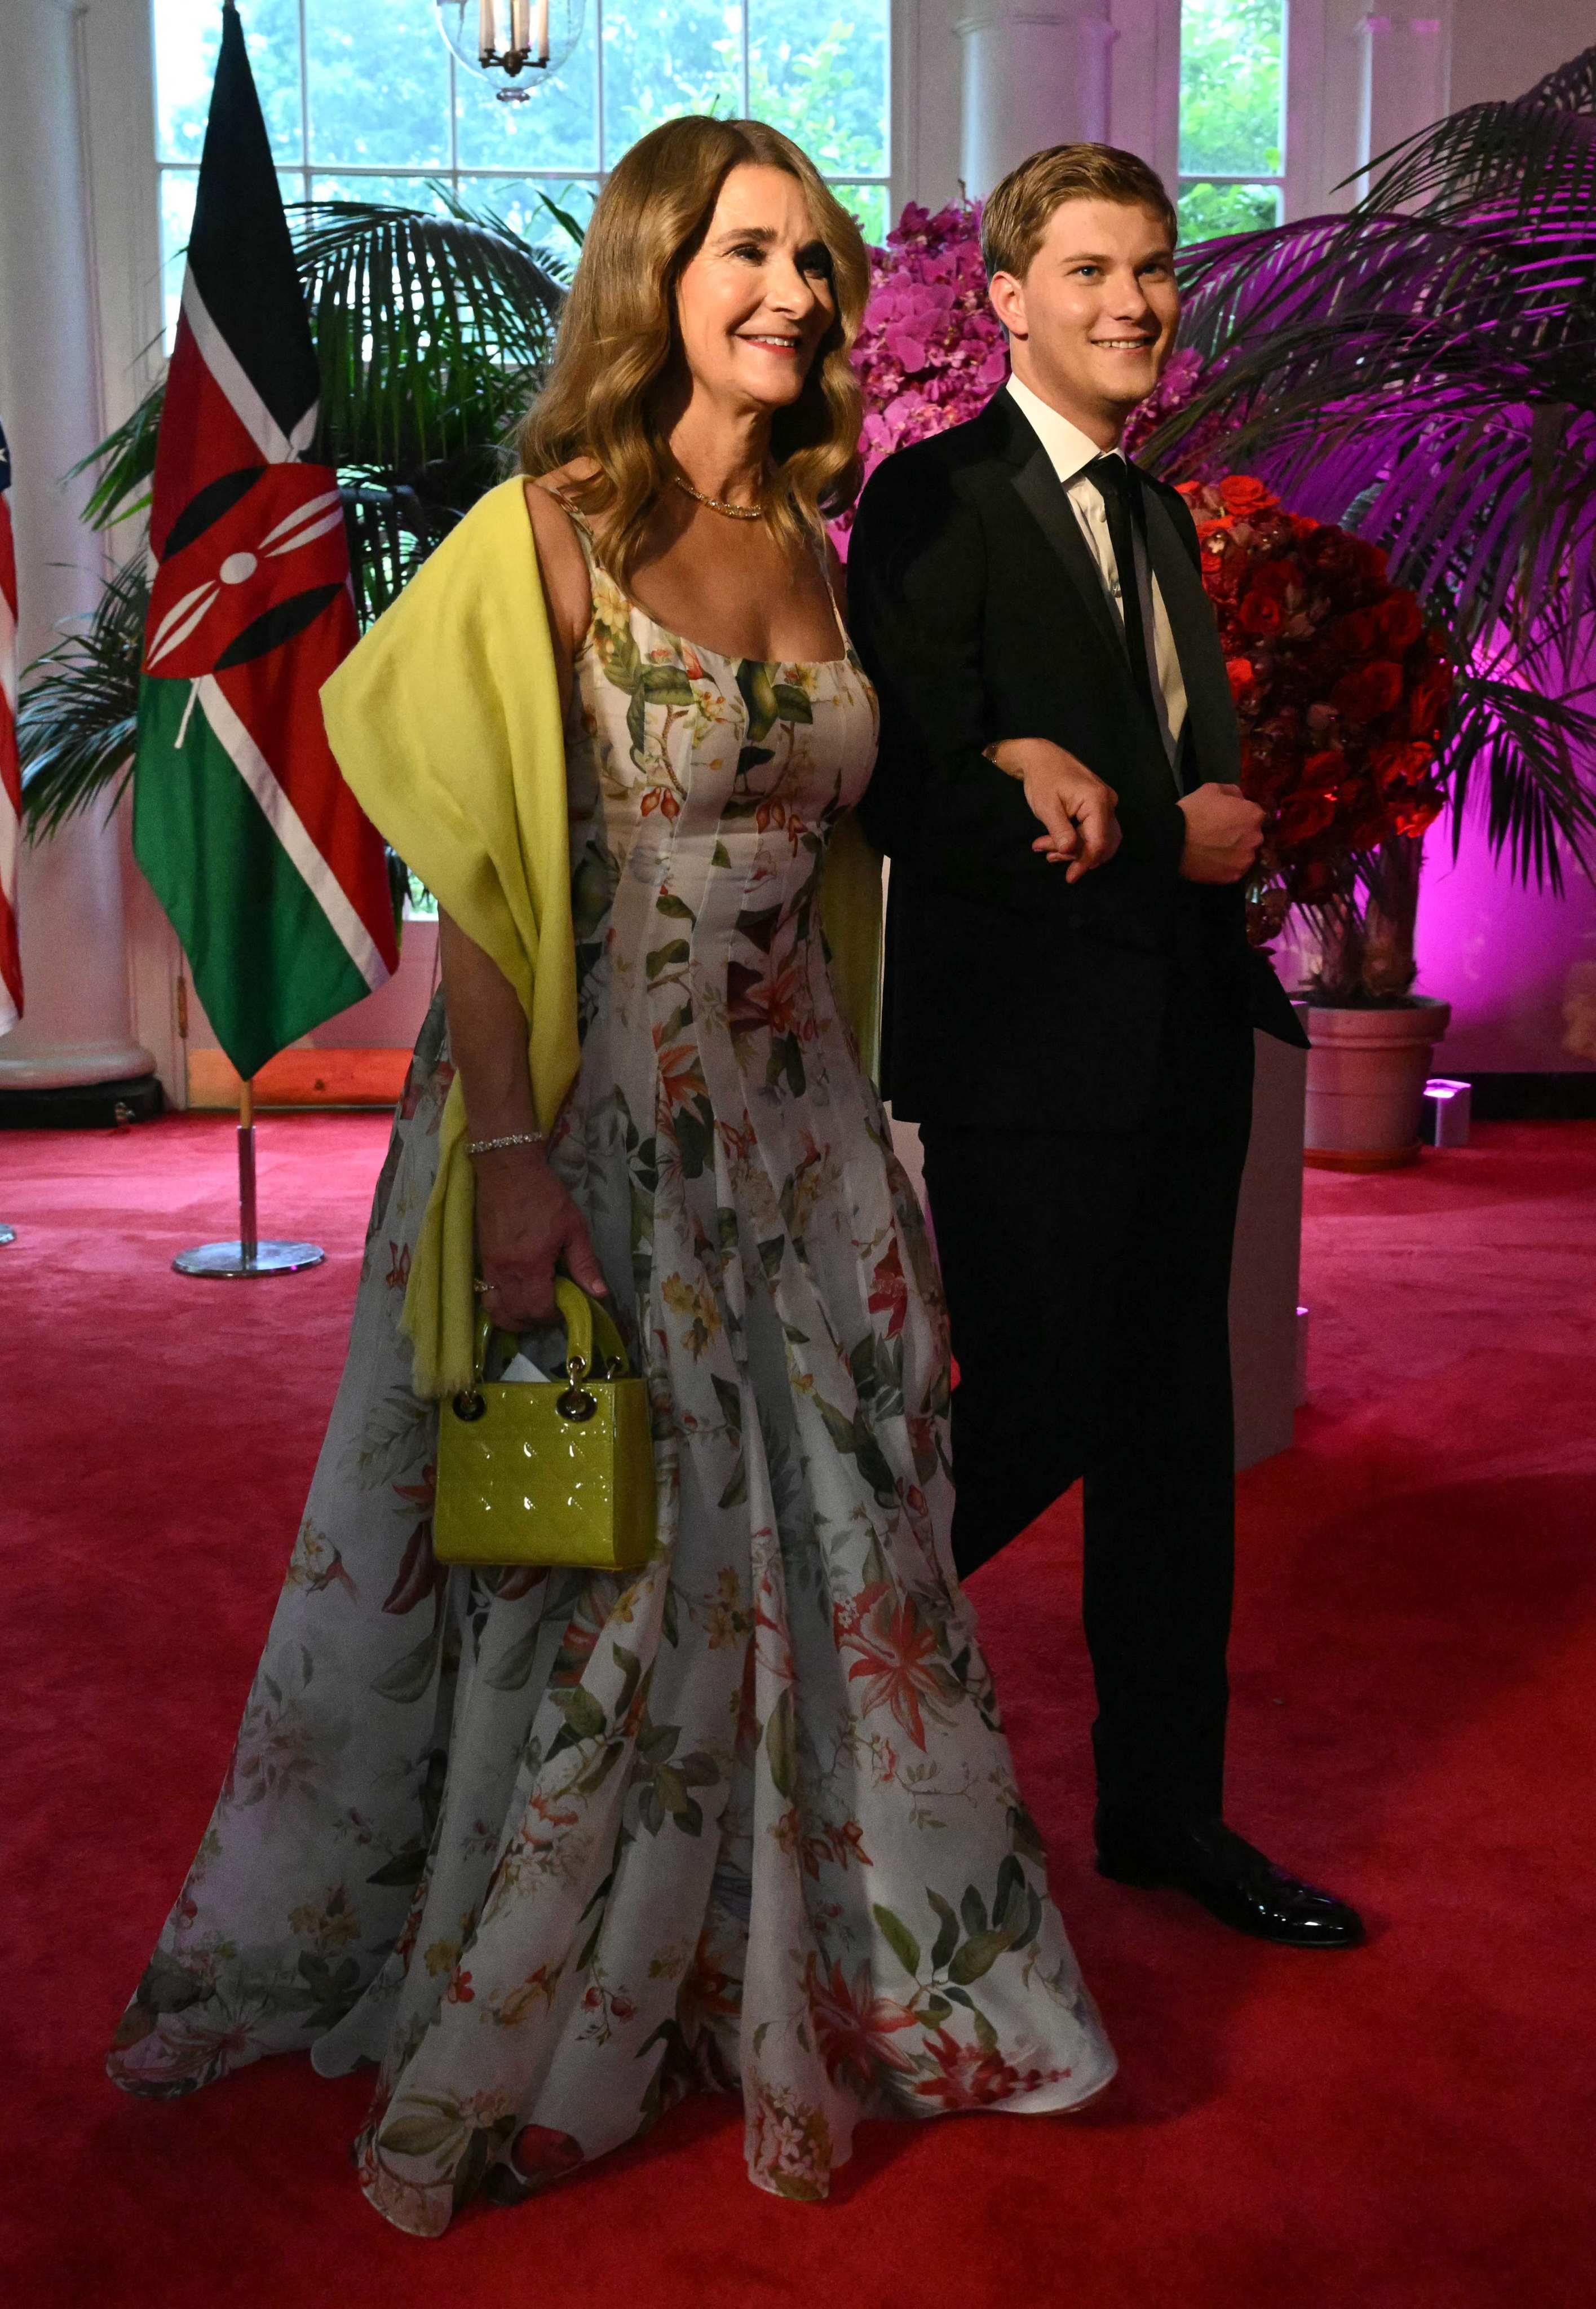 Philantropist Melinda French Gates and Rory Gates arrive at the Booksellers Room for the state dinner with the Kenyan president at the White House in Washington DC, on May 23. Photo: AFP